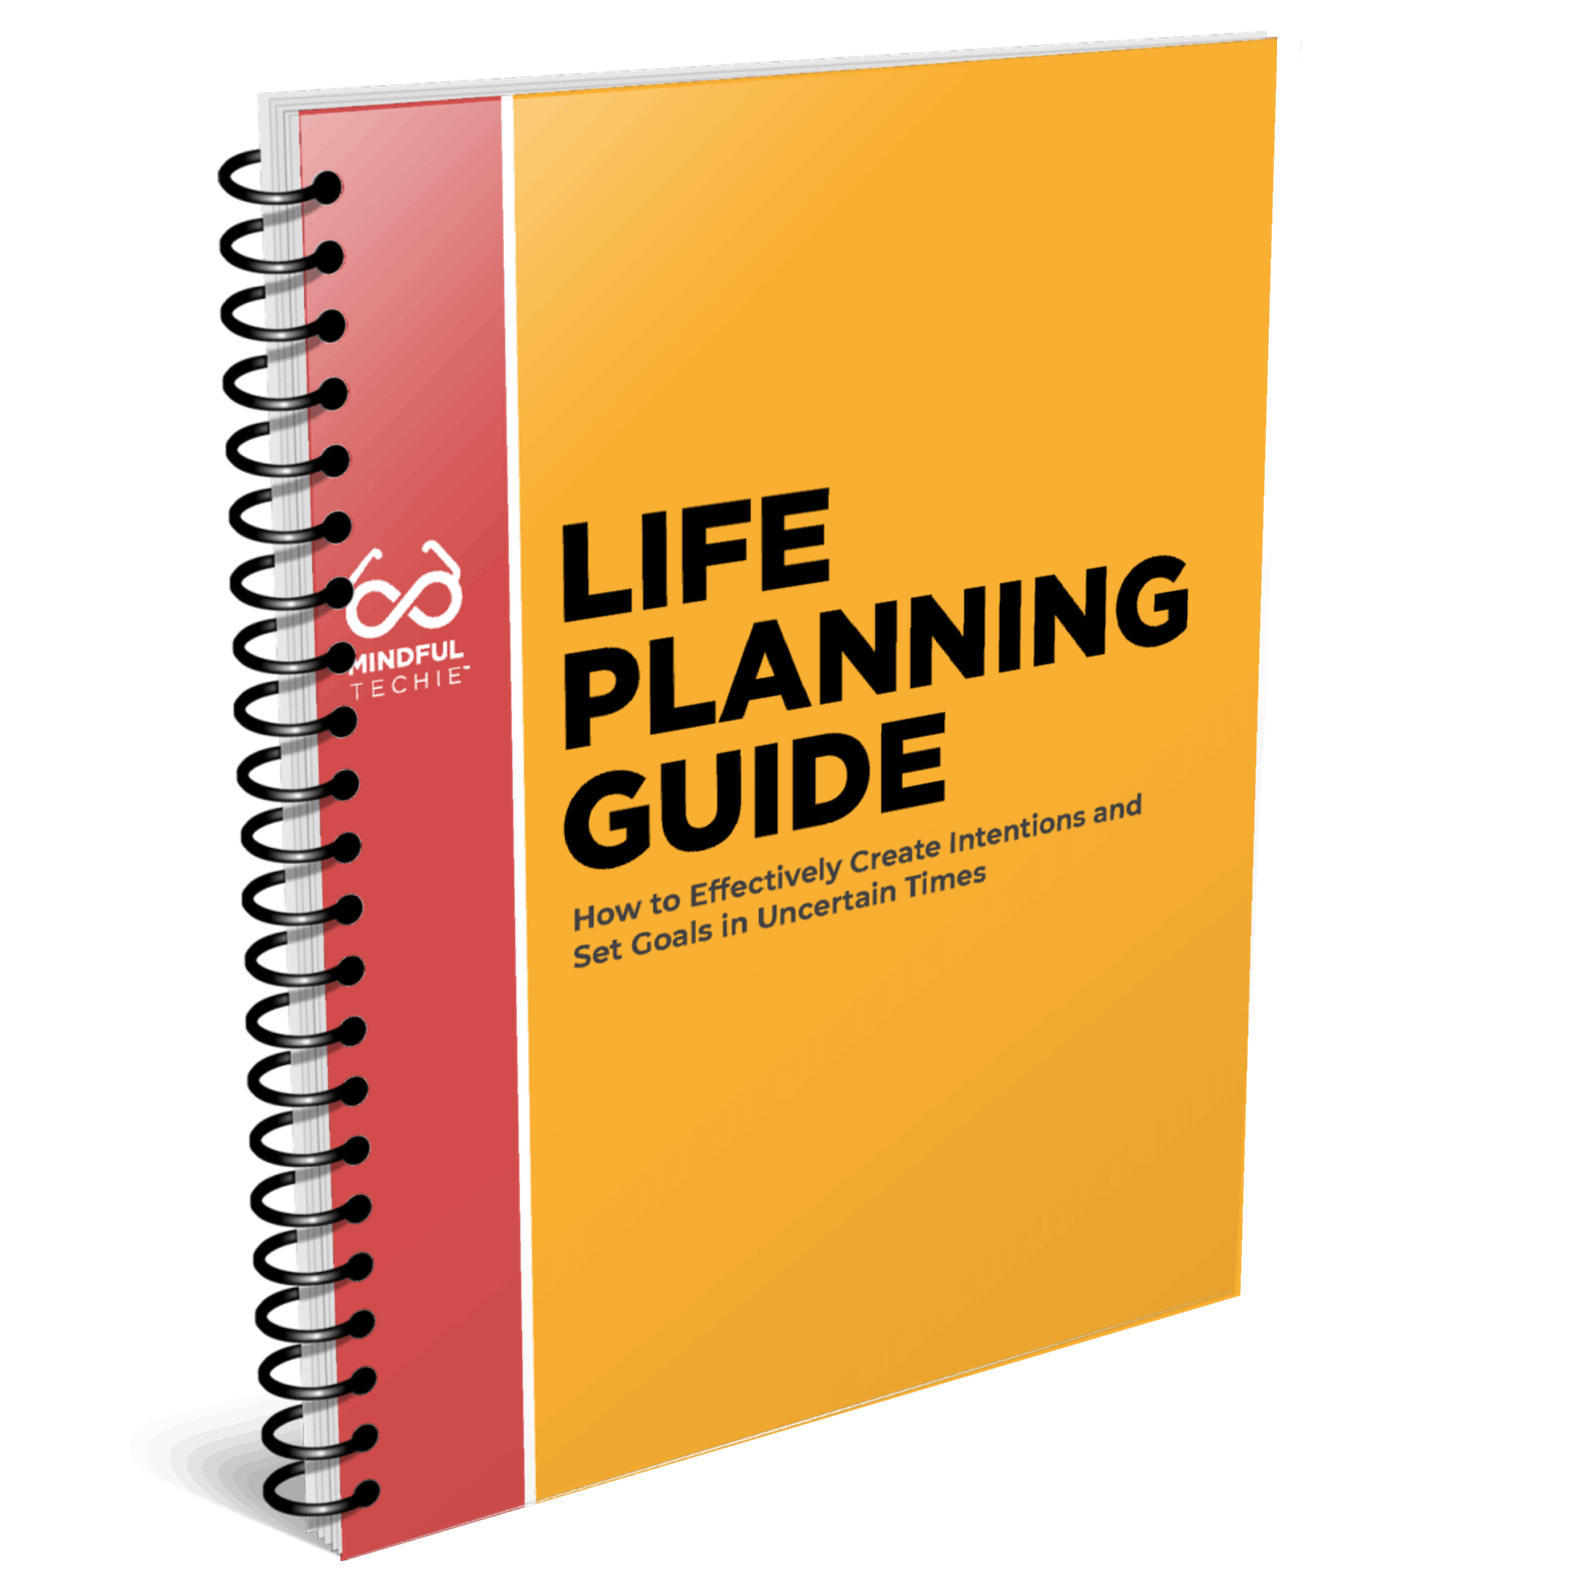 FREE 2024 Life Planning Masterclass​ on Saturday, December 16th at 1:30 PM ET: https://mindfultechie.com/lifeplanning